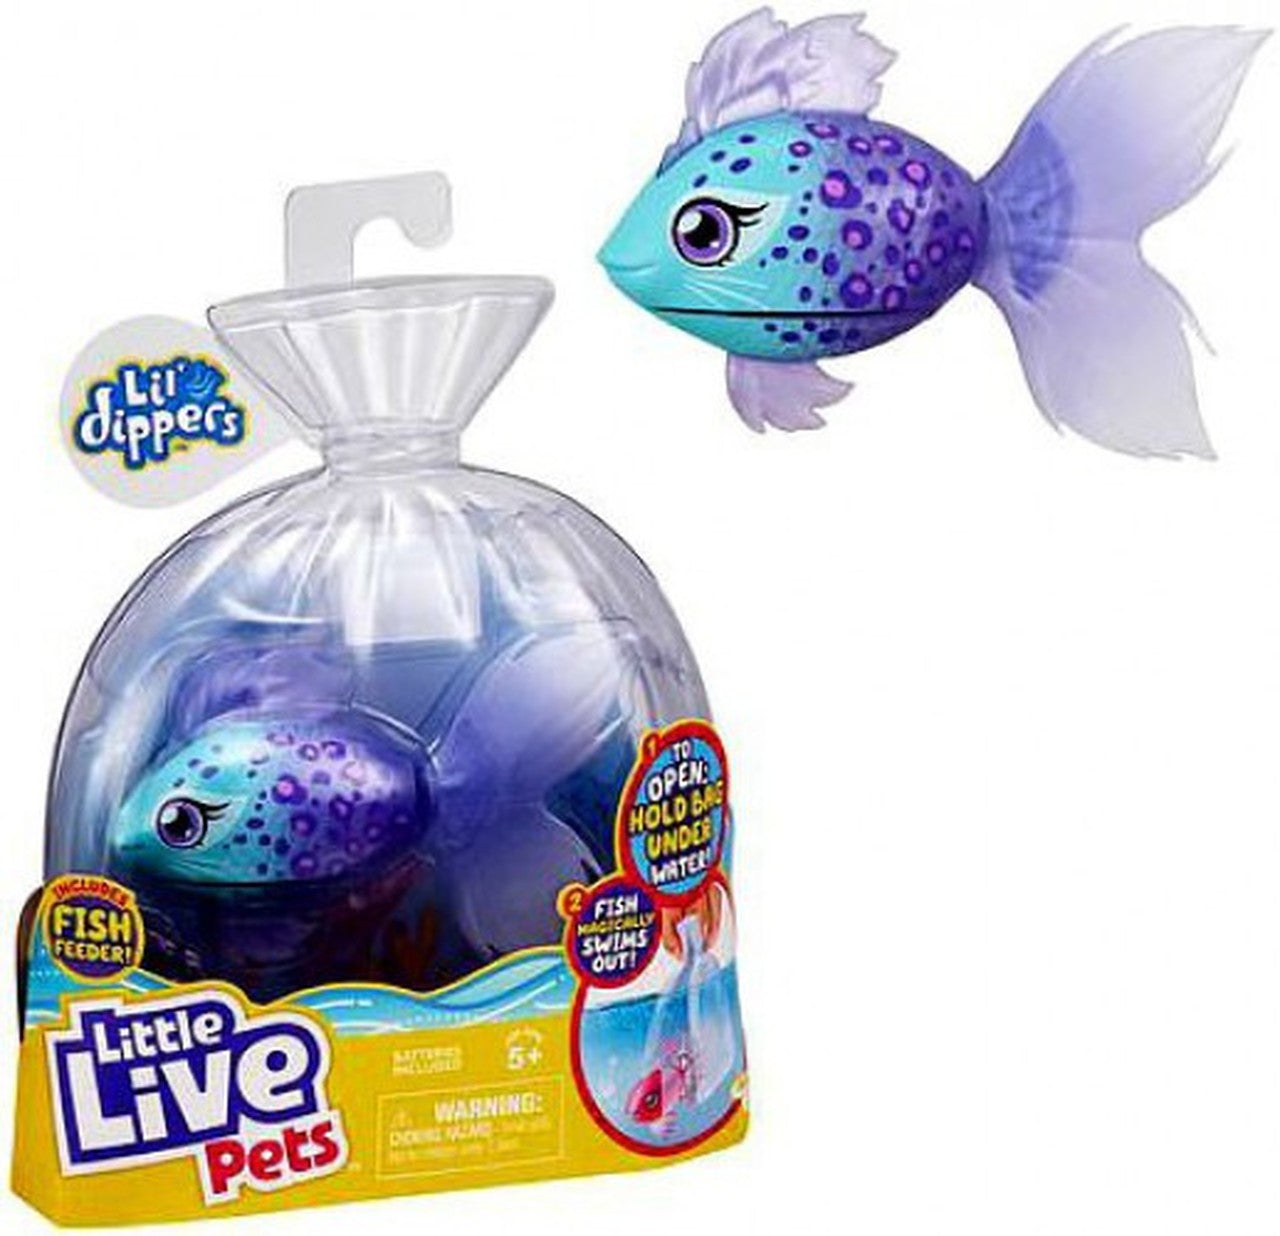 LITTLE LIVE PETS LIL DIPPERS SINGLE PACK